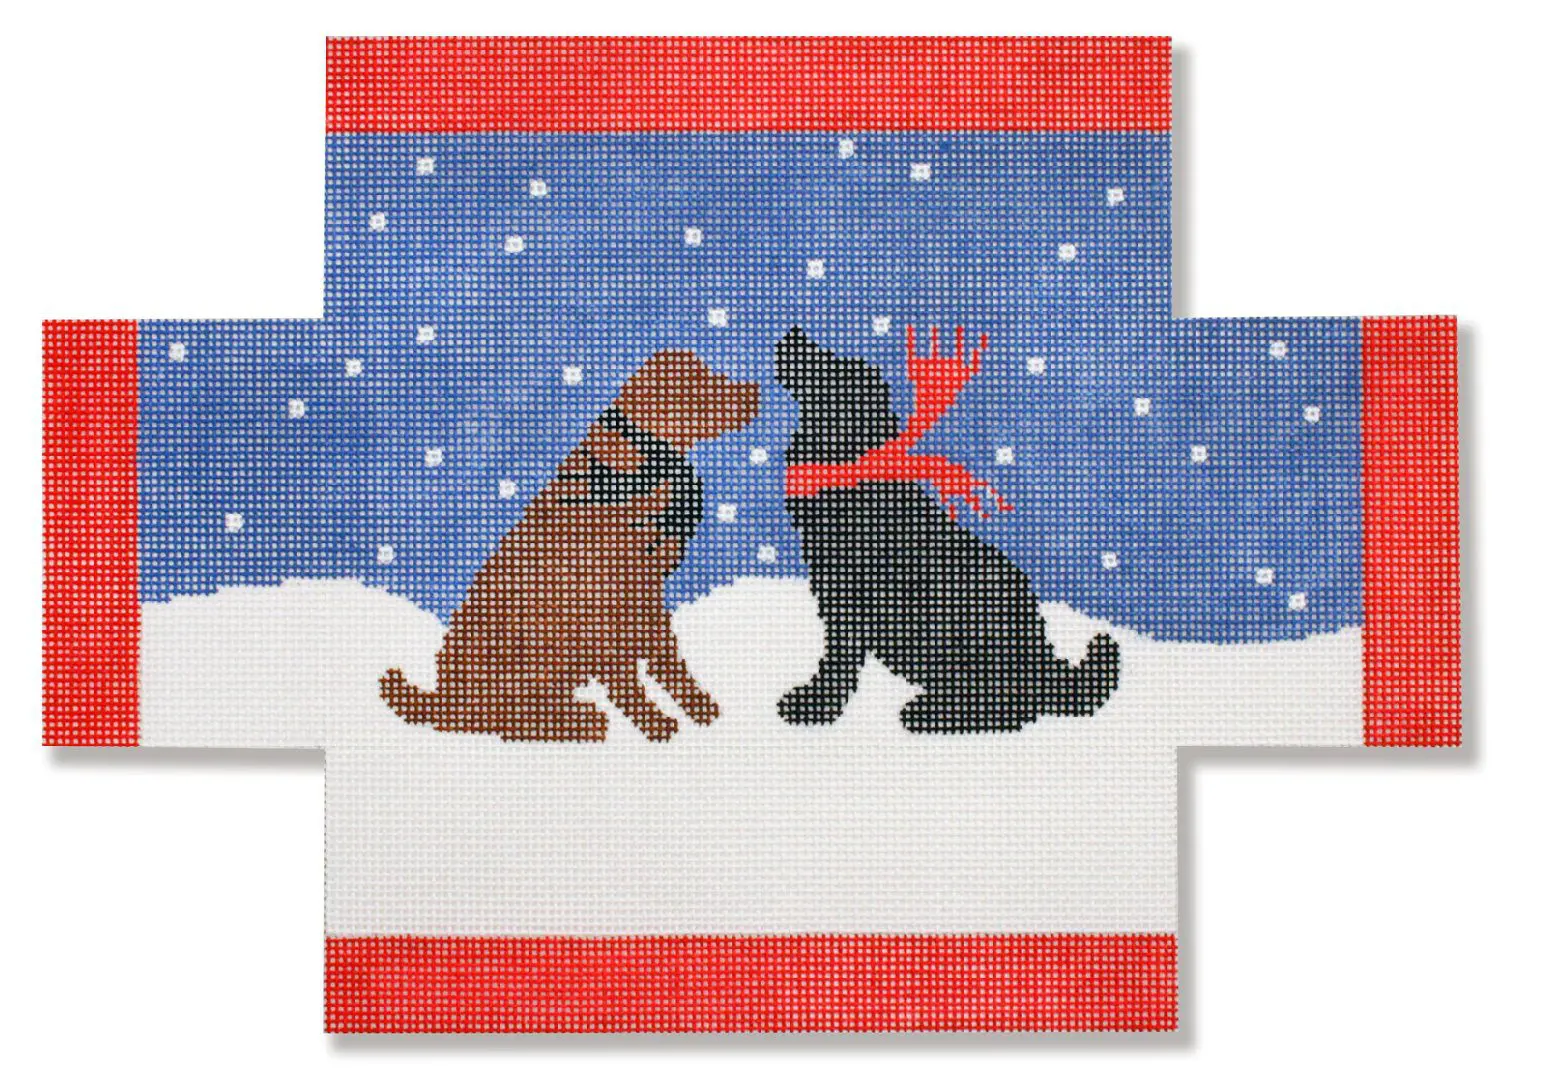 A cross stitch picture of two dogs in the snow by Cecilia Eriksen.